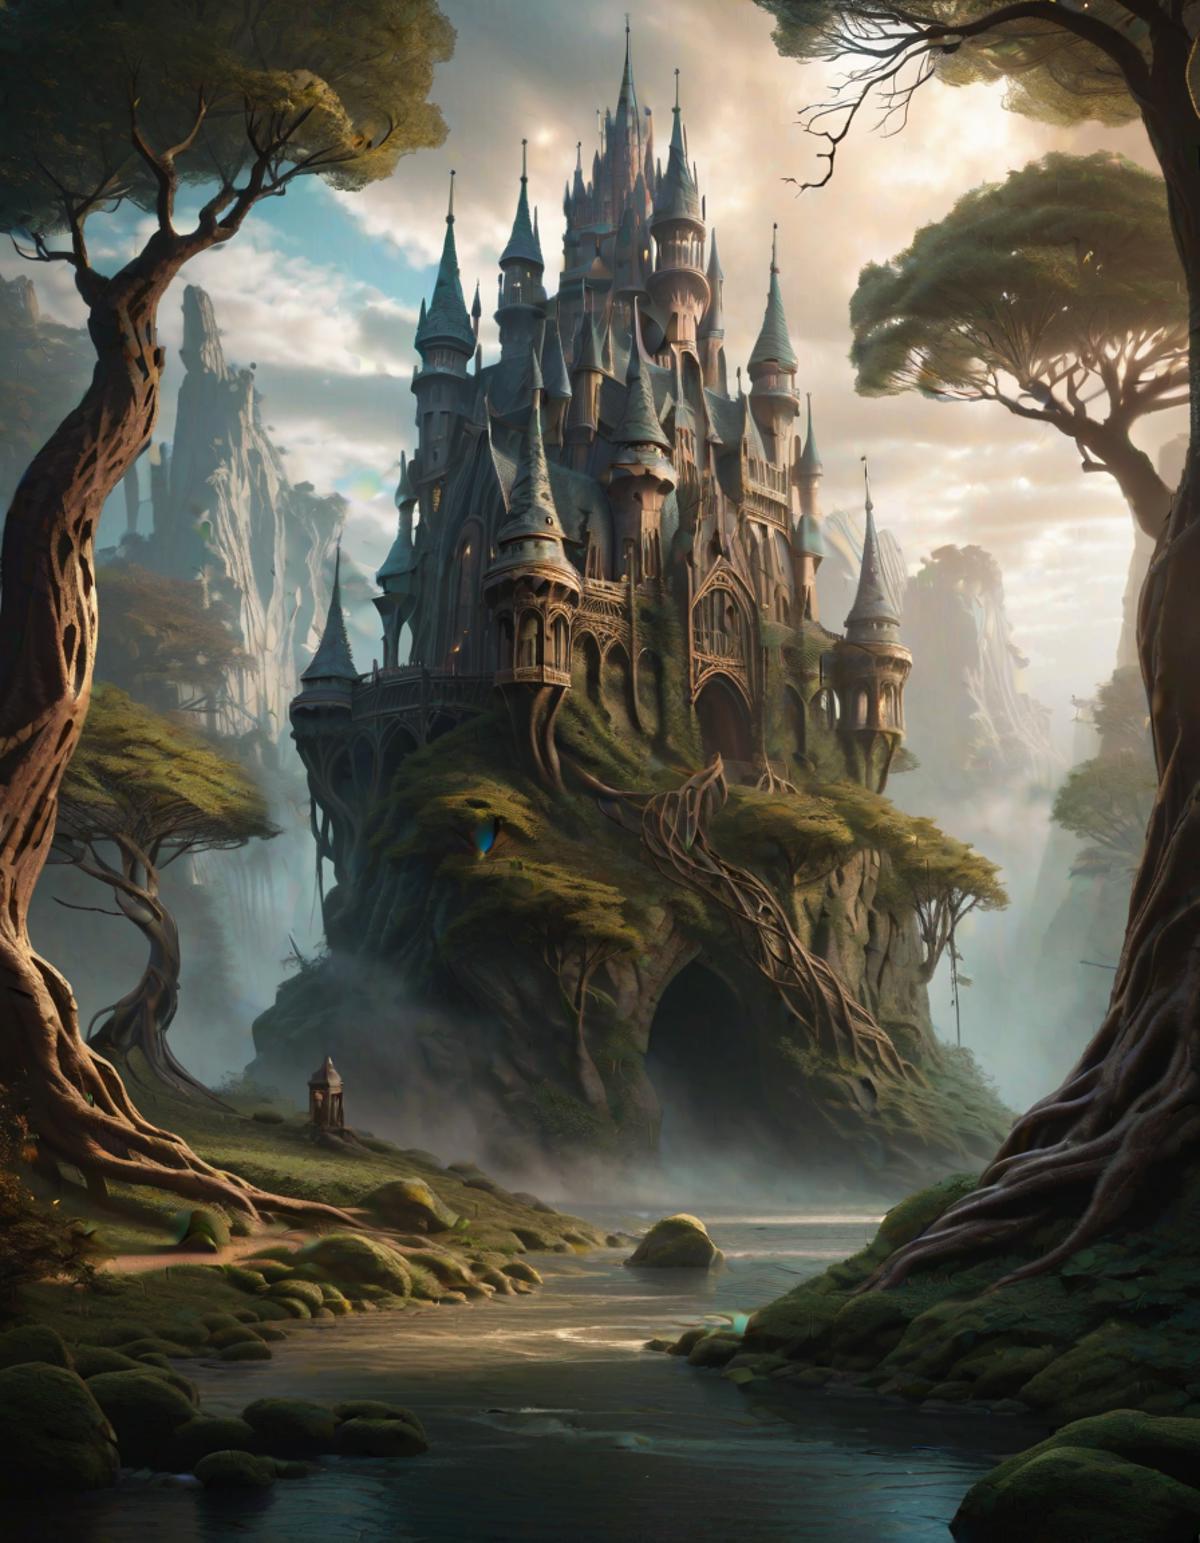 A Fantasy Castle in a Lush Forest with a Wizard Standing Nearby